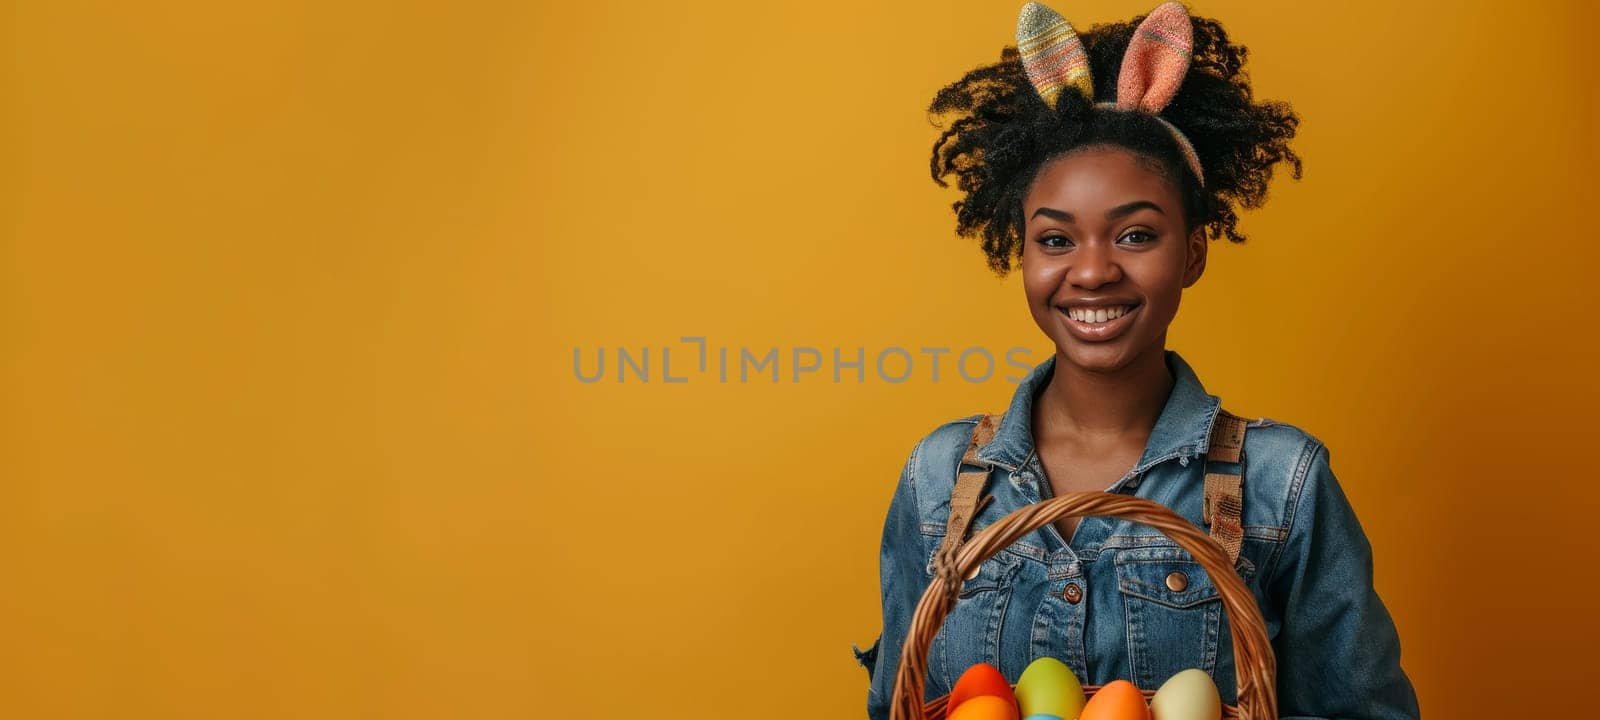 Woman with bunny ears holding Easter basket with colored eggs. by andreyz